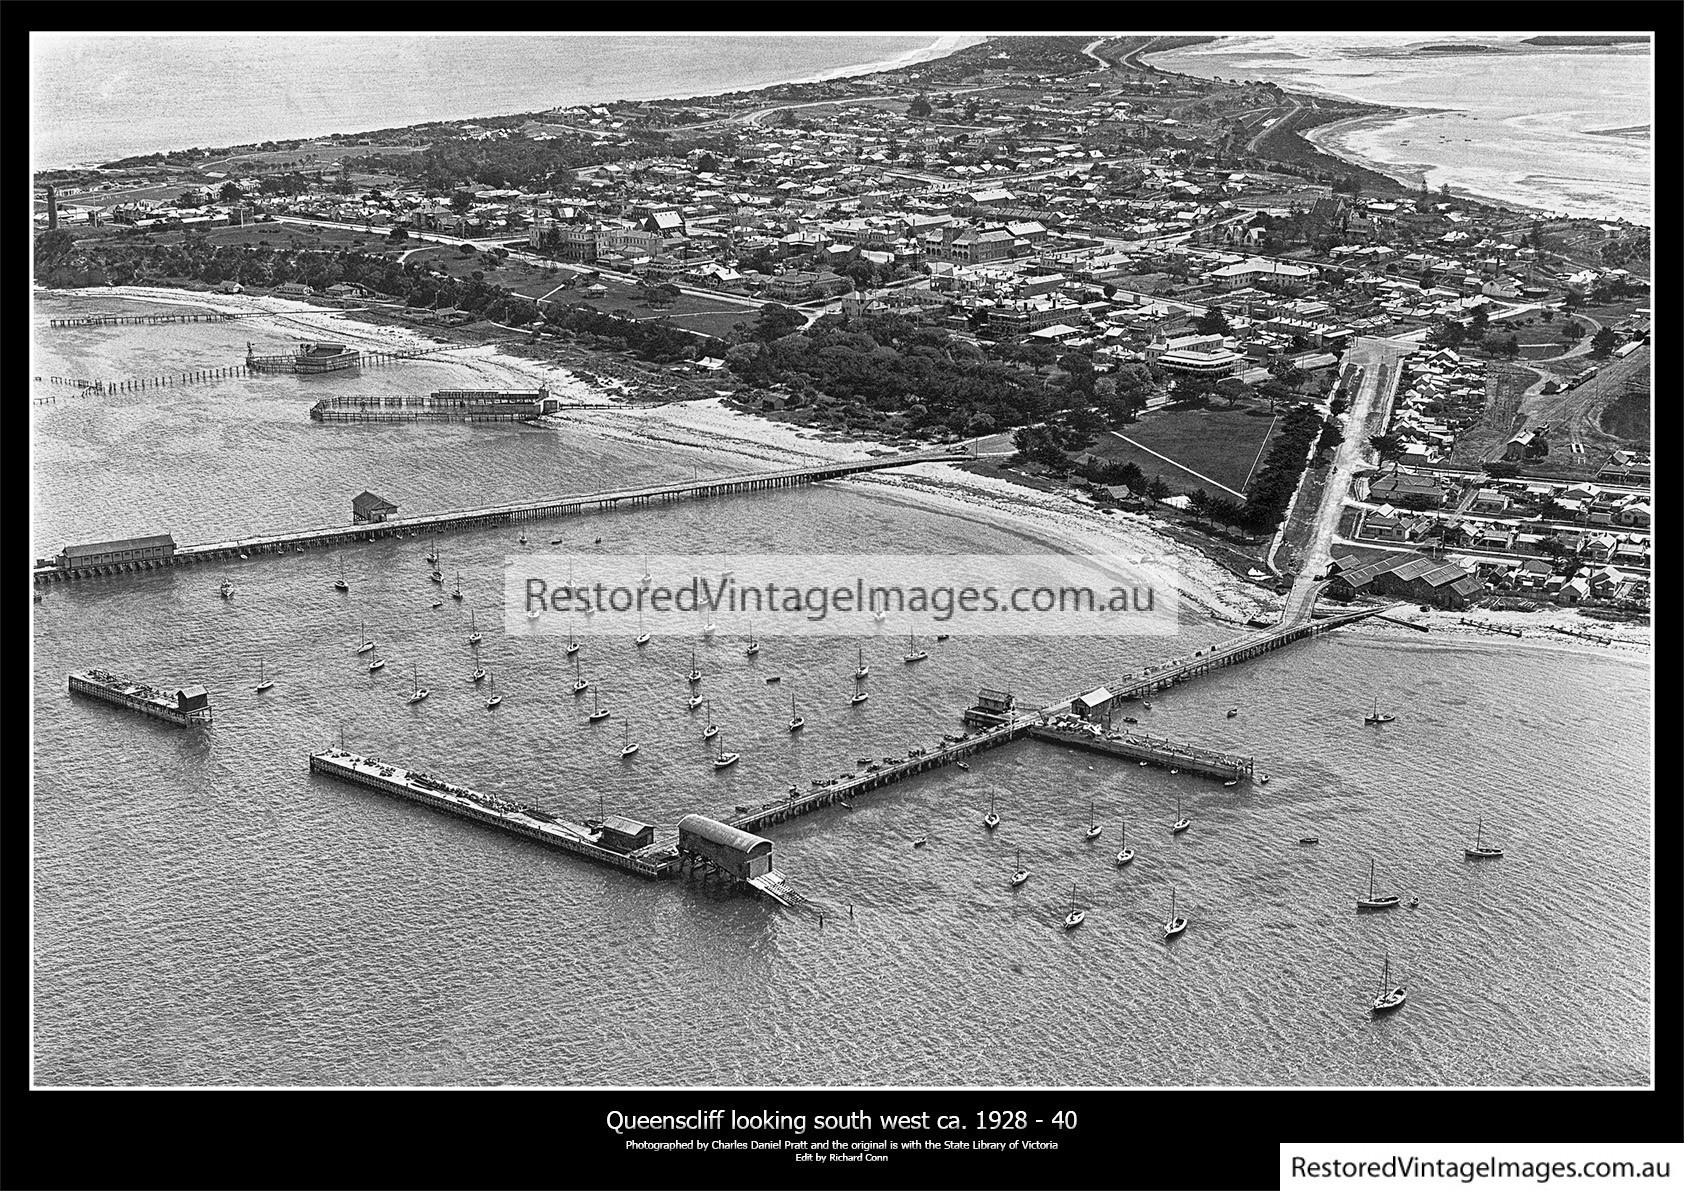 Aerial Of The Queenscliff Piers And Town 1928-40